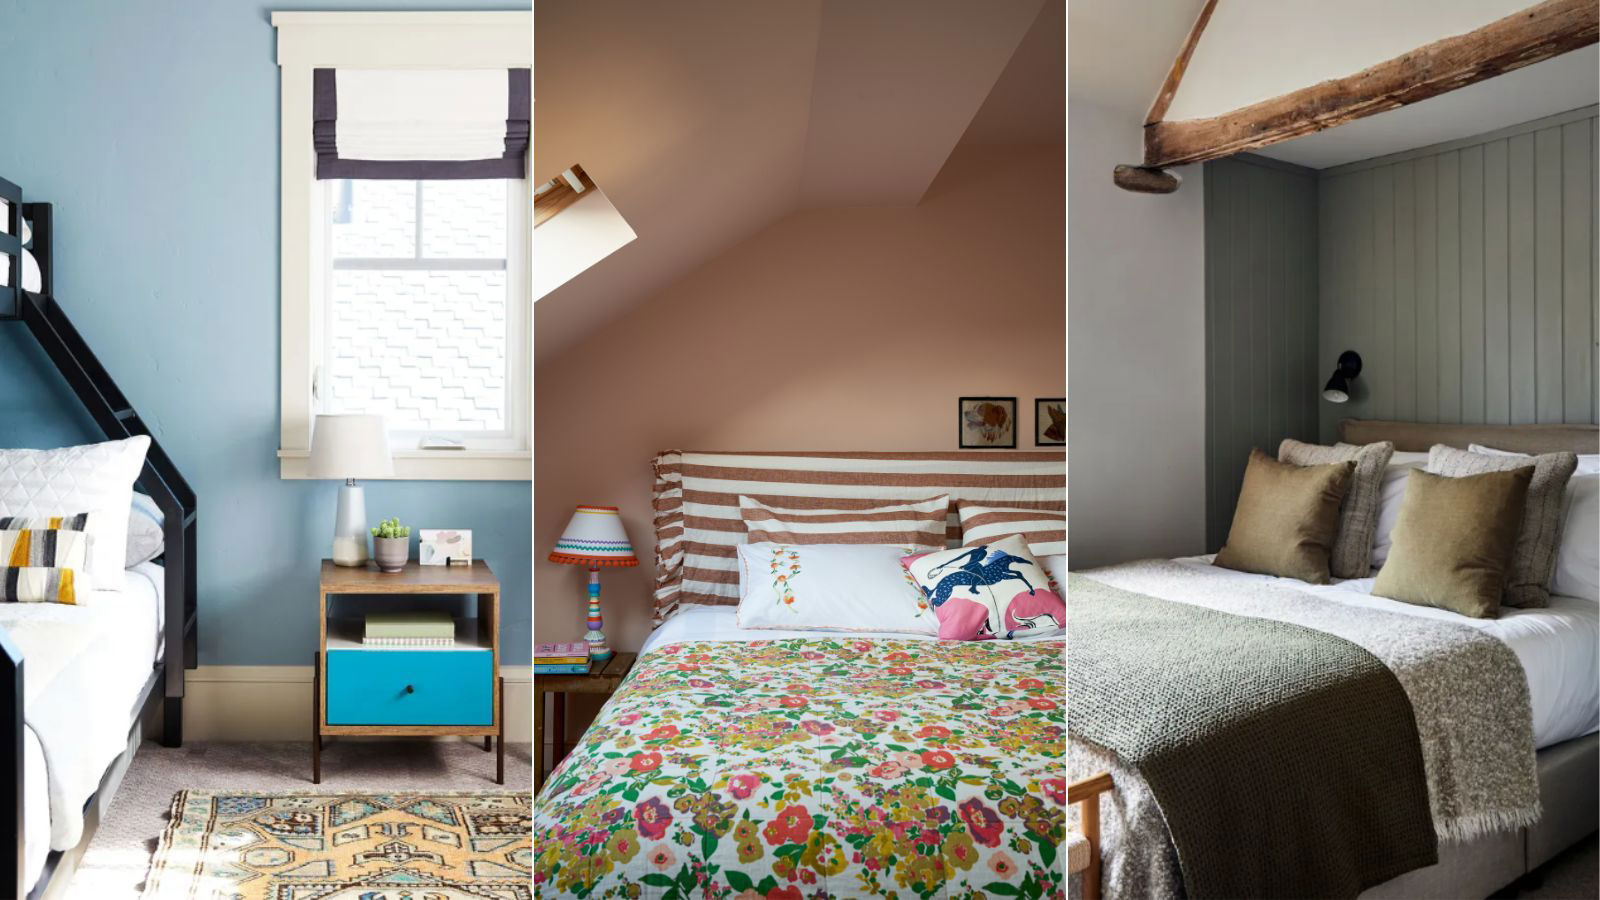 5 colors that will make your bedroom feel calmer, according to designers